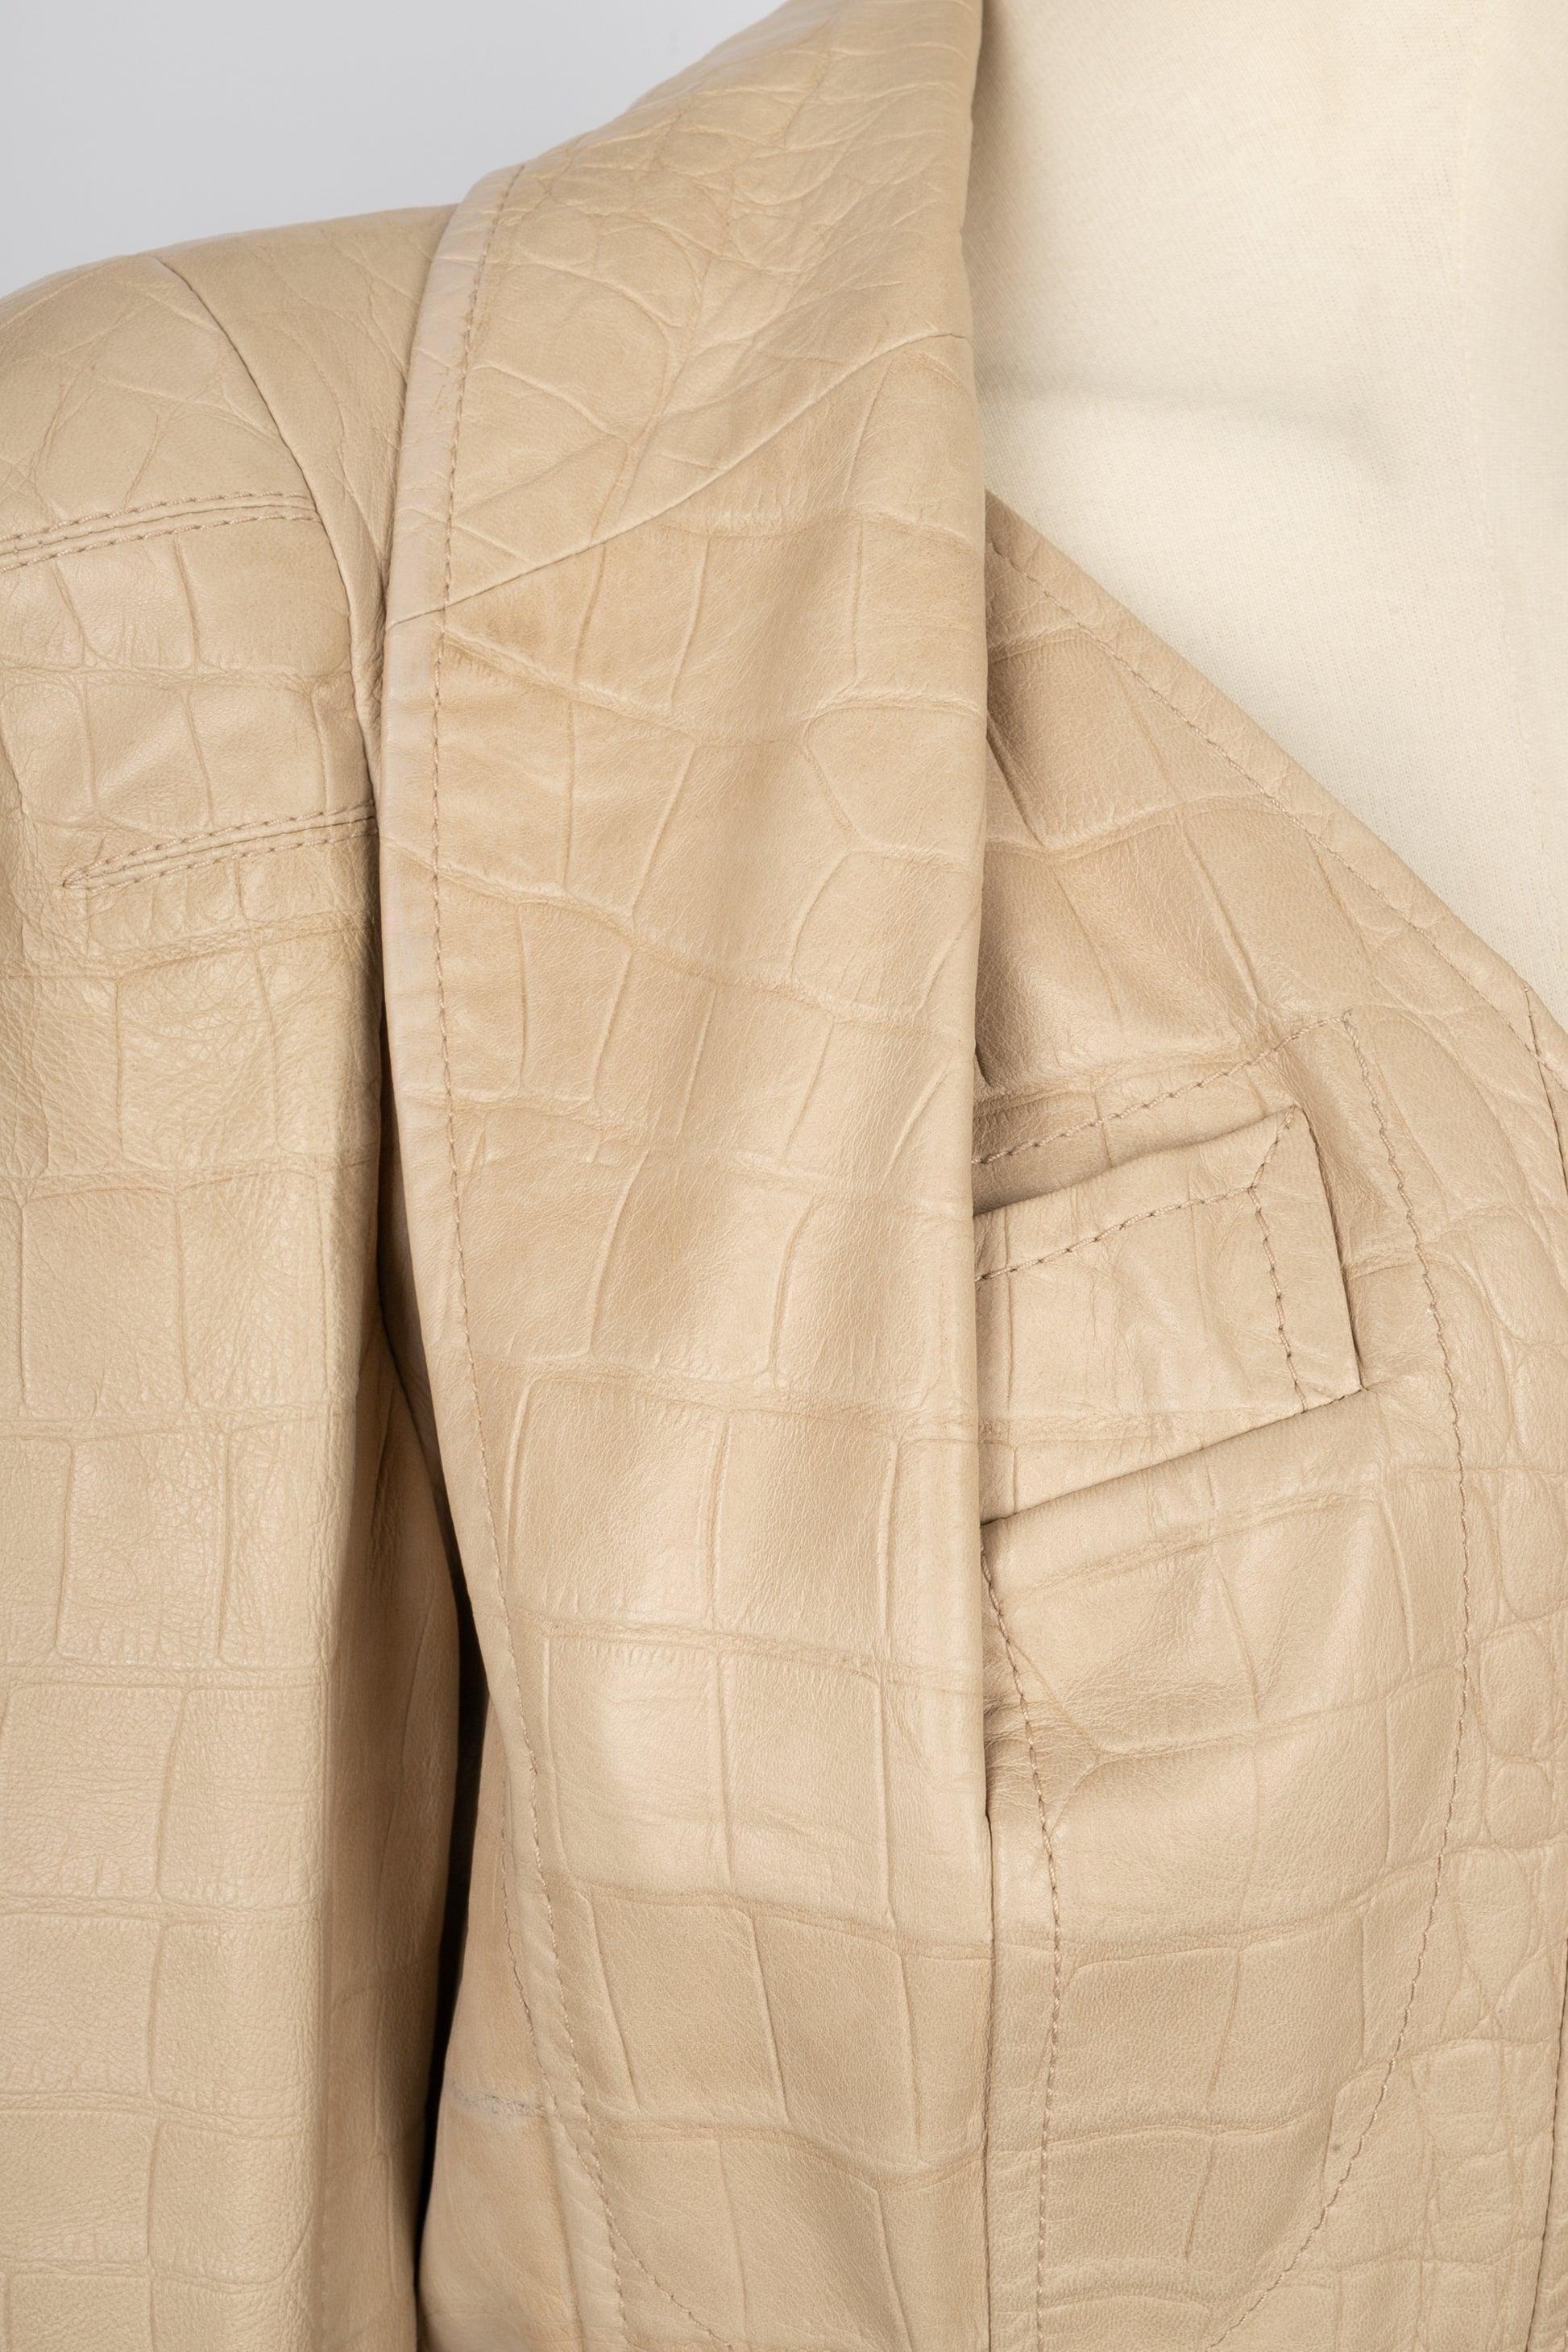 Dior Lamb Leather Jacket with Crocodile Print in Beige Tones, 2005 For Sale 3